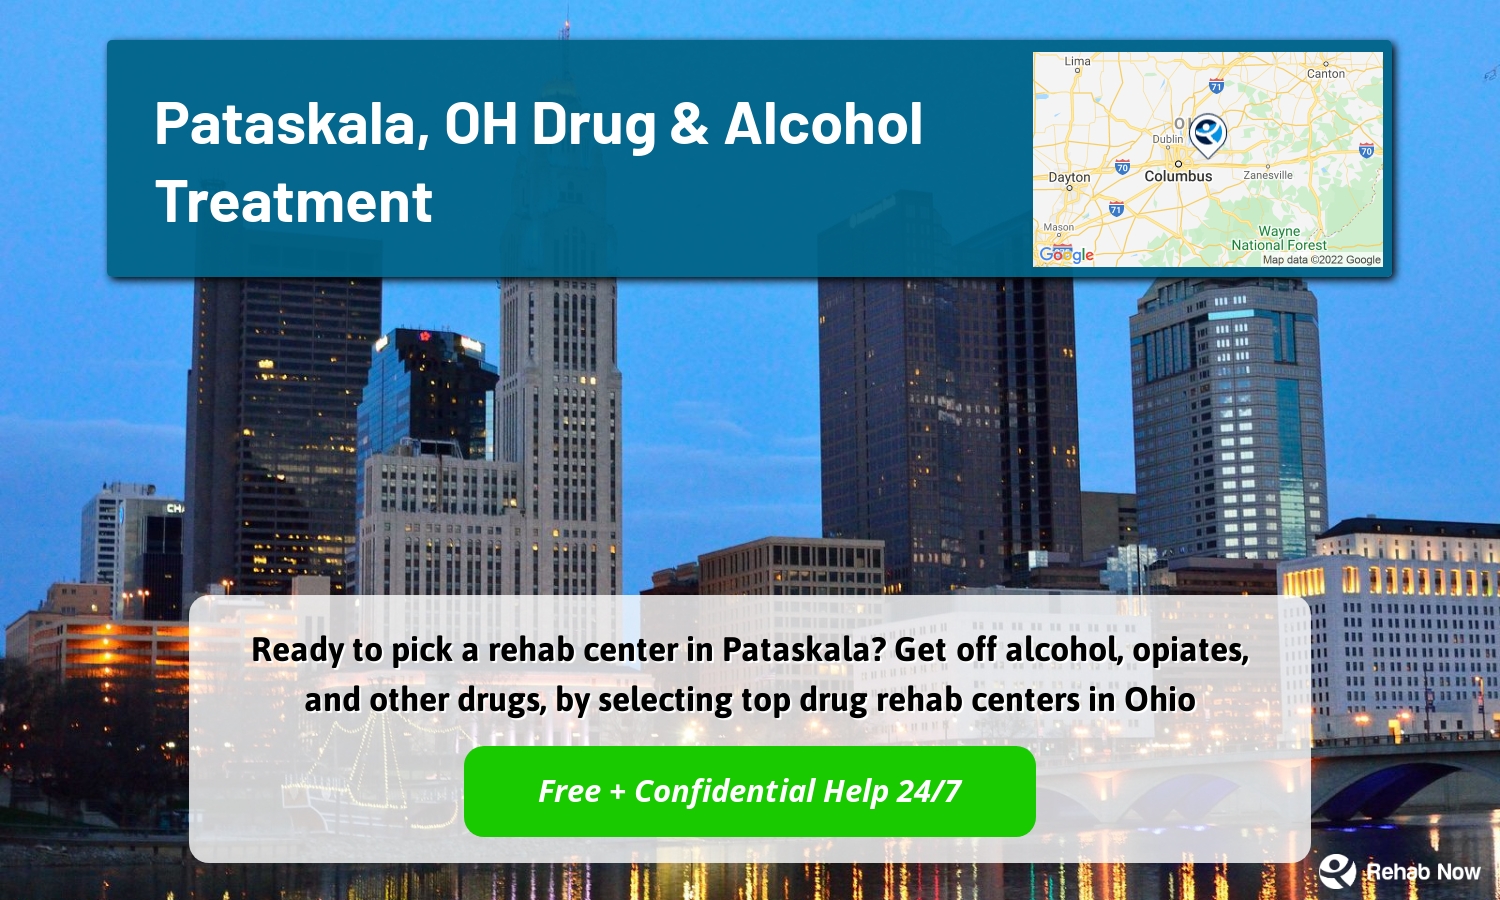 Ready to pick a rehab center in Pataskala? Get off alcohol, opiates, and other drugs, by selecting top drug rehab centers in Ohio